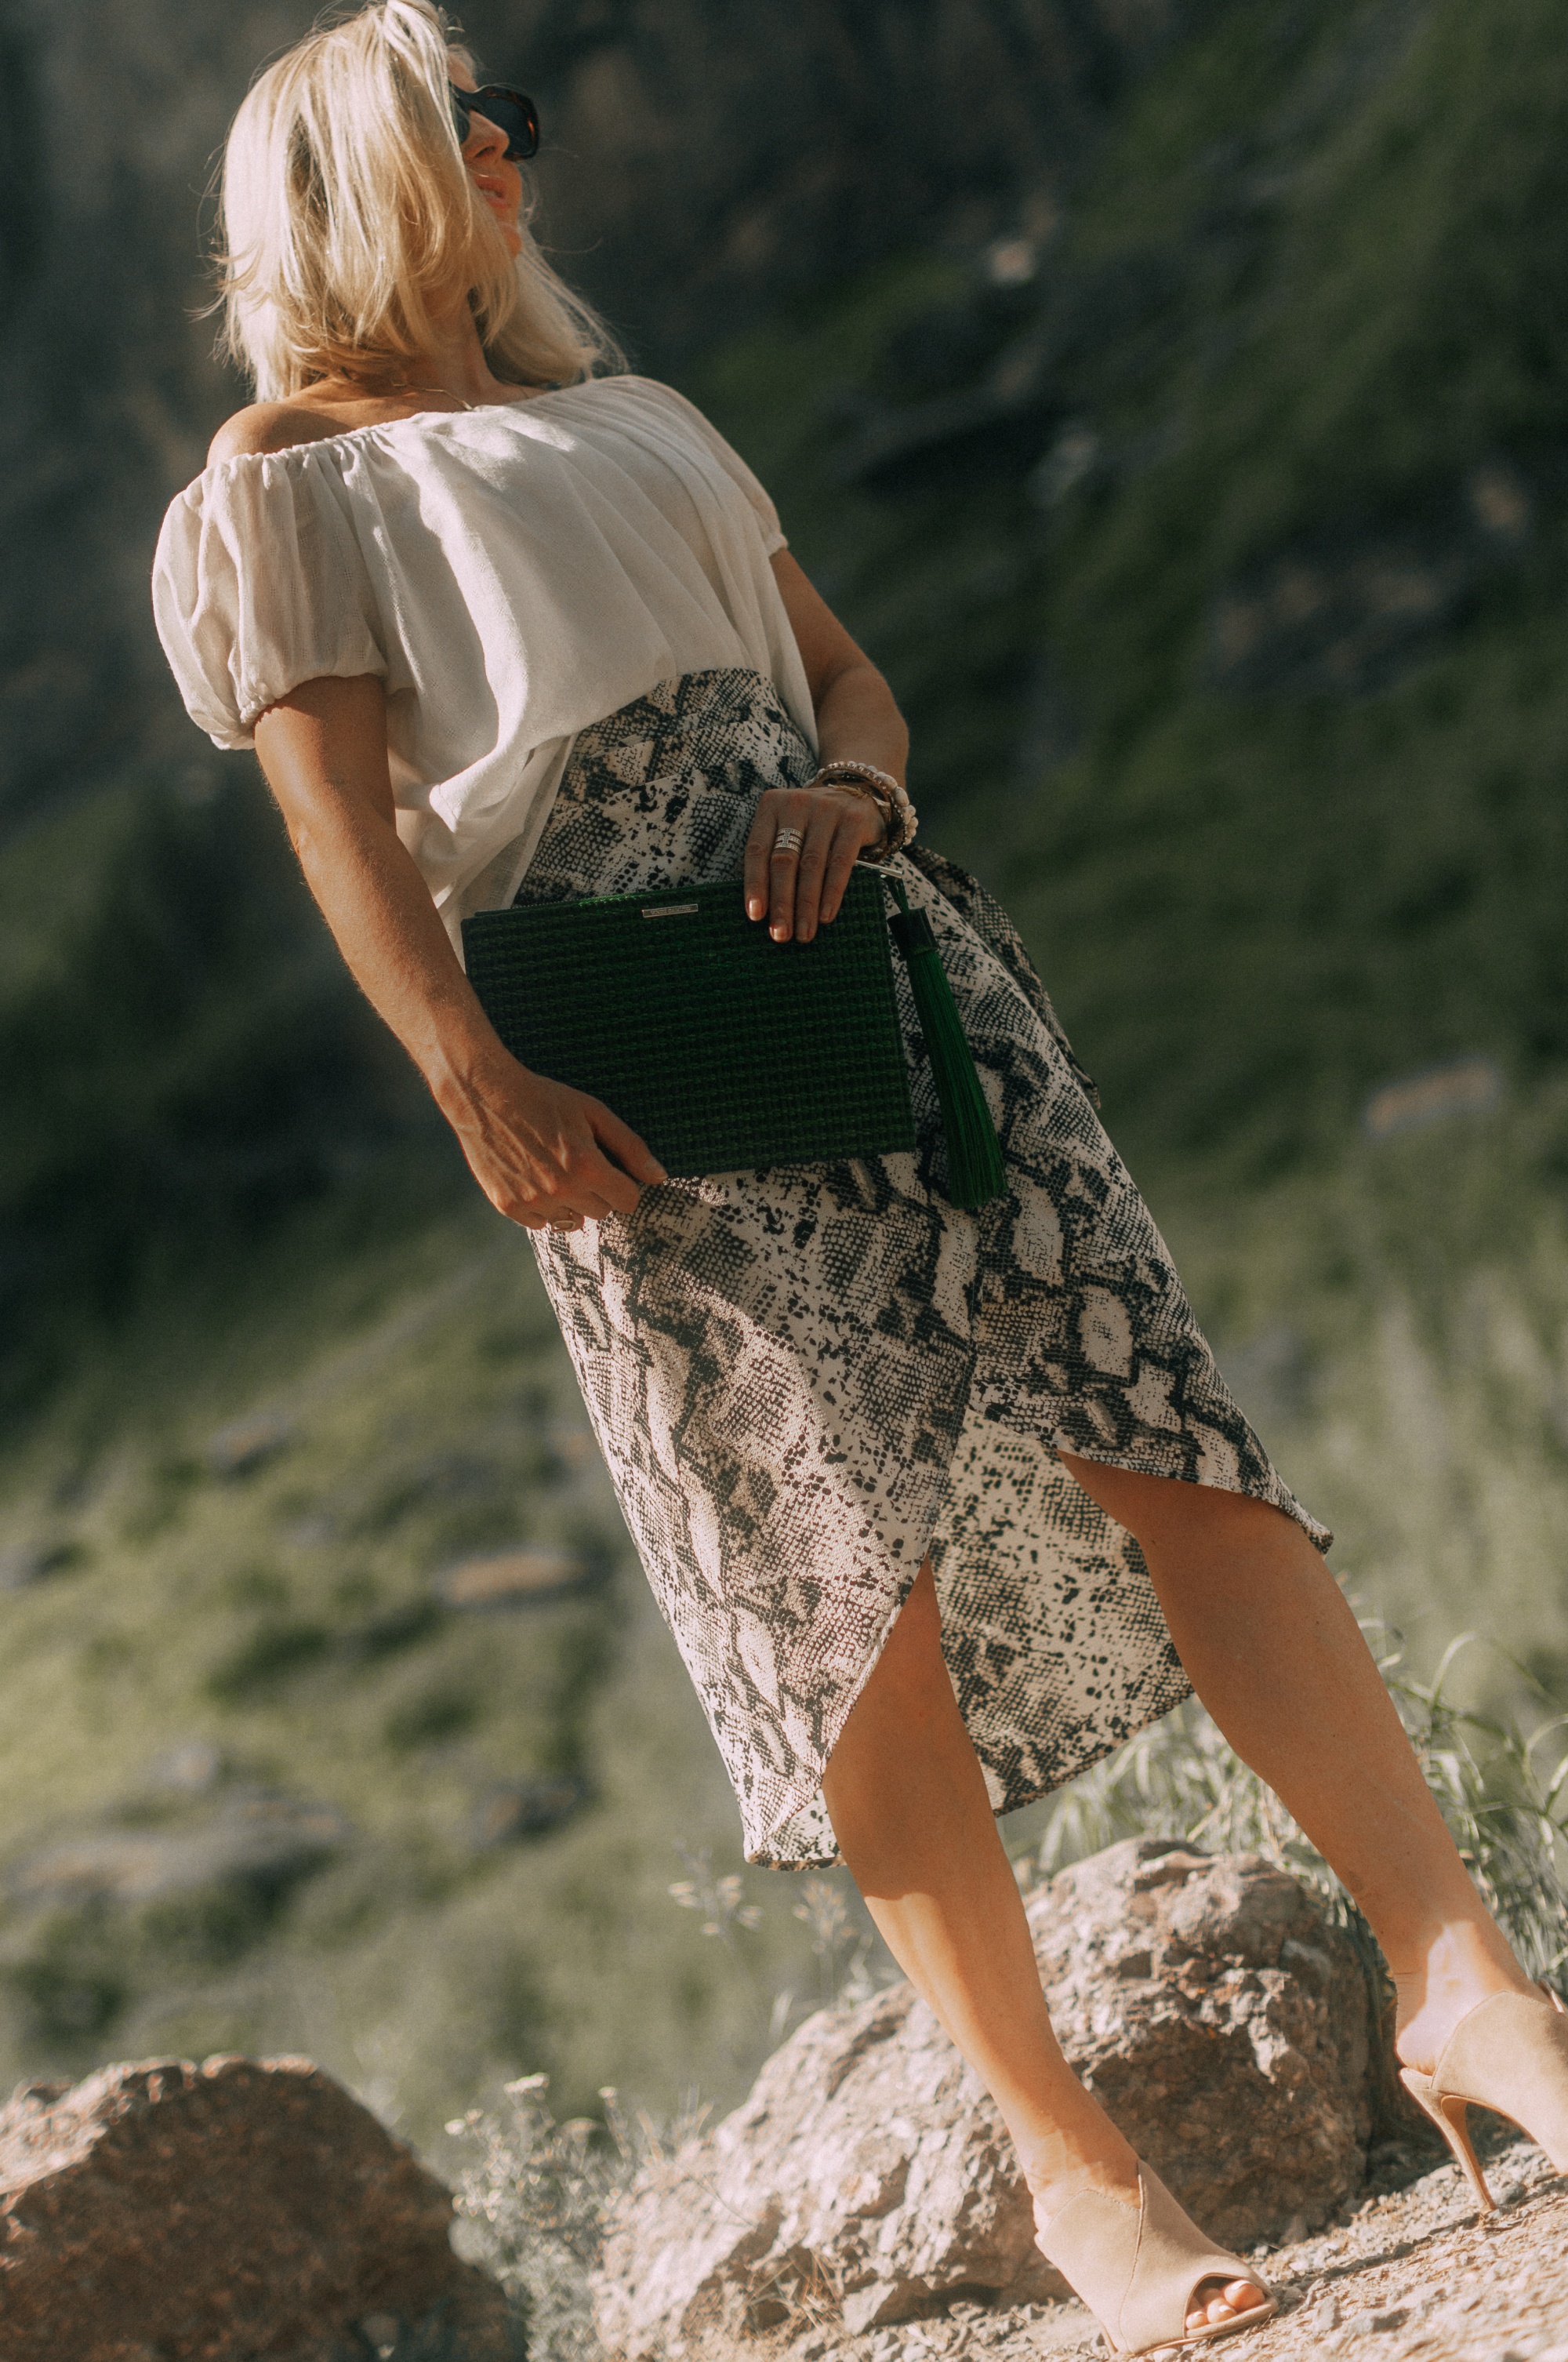 Styling animal print clothes with neutral Accessories, Fashion blogger Erin Busbee of BusbeeStyle,com wearing metallic gold croc-embossed sandals and green clutch from Vince Camuto with a white off the shoulder top and python print wrap skirt from Evereve in Telluride, CO